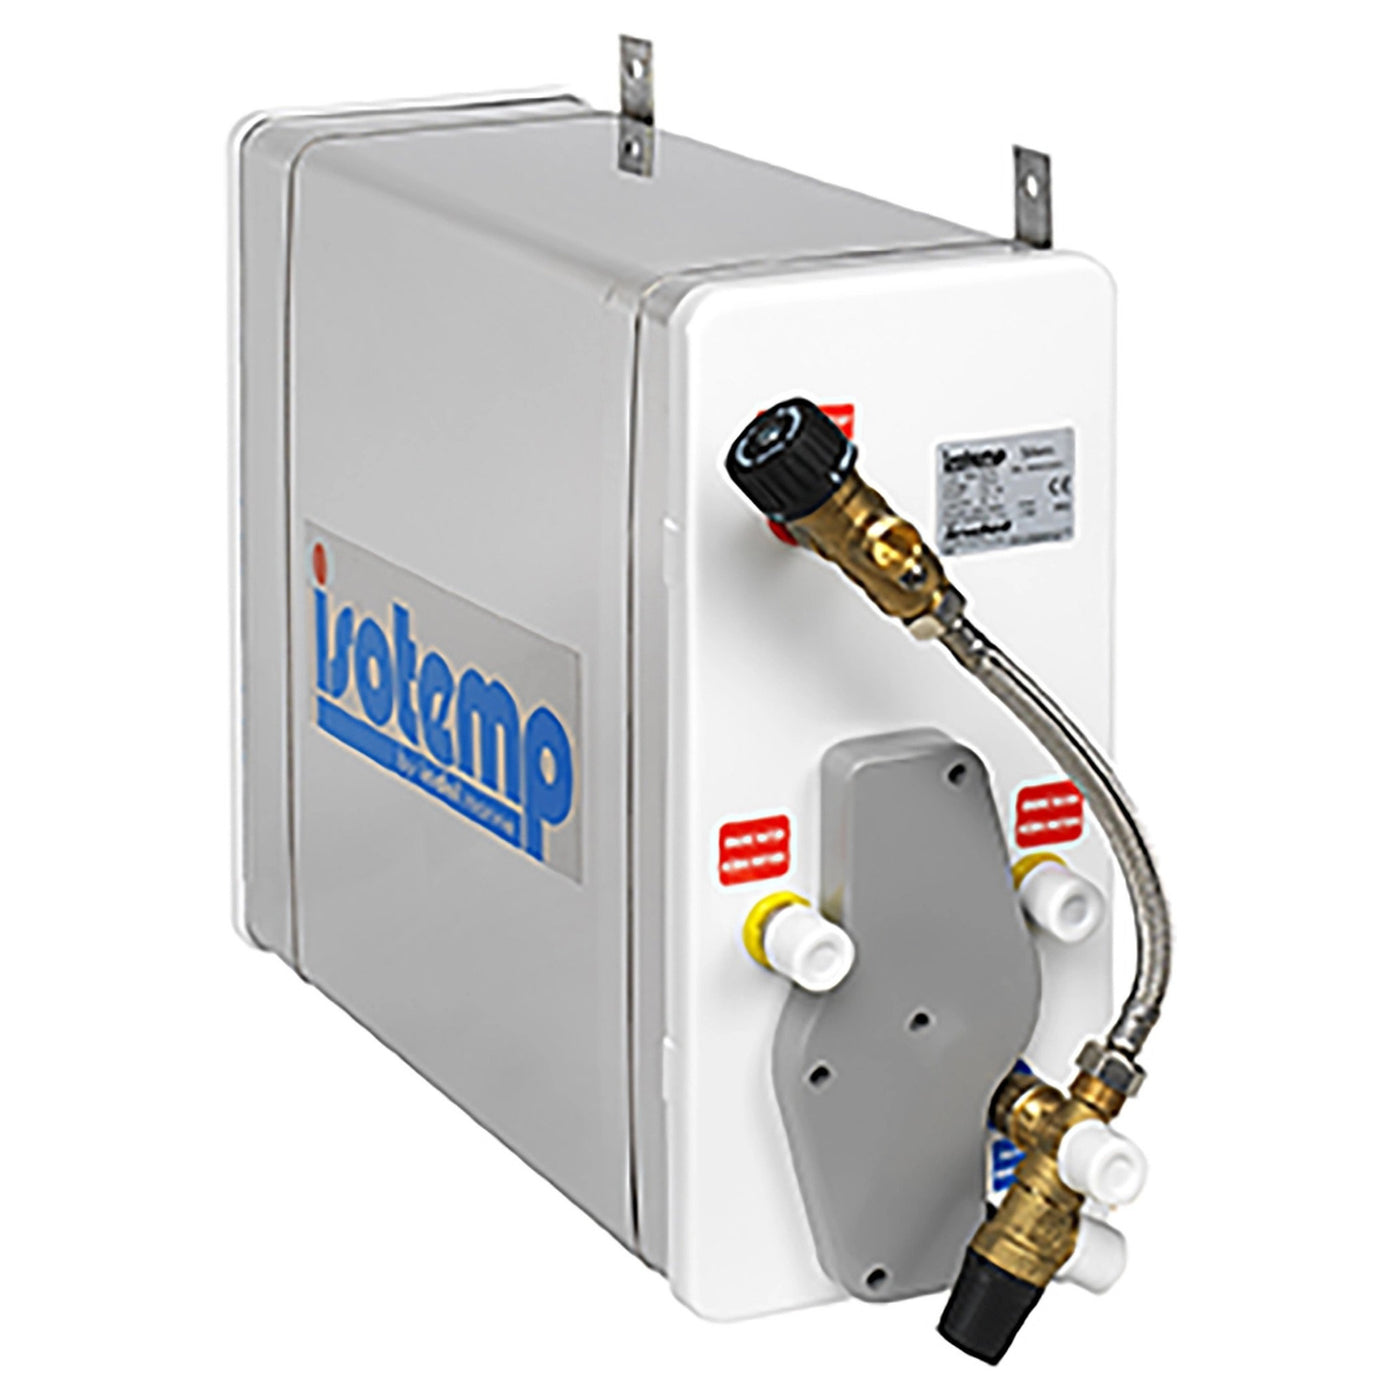 Isotherm 601623 Isotemp Slim Square 4.2 Gal/16L Electric Hot Water Heater